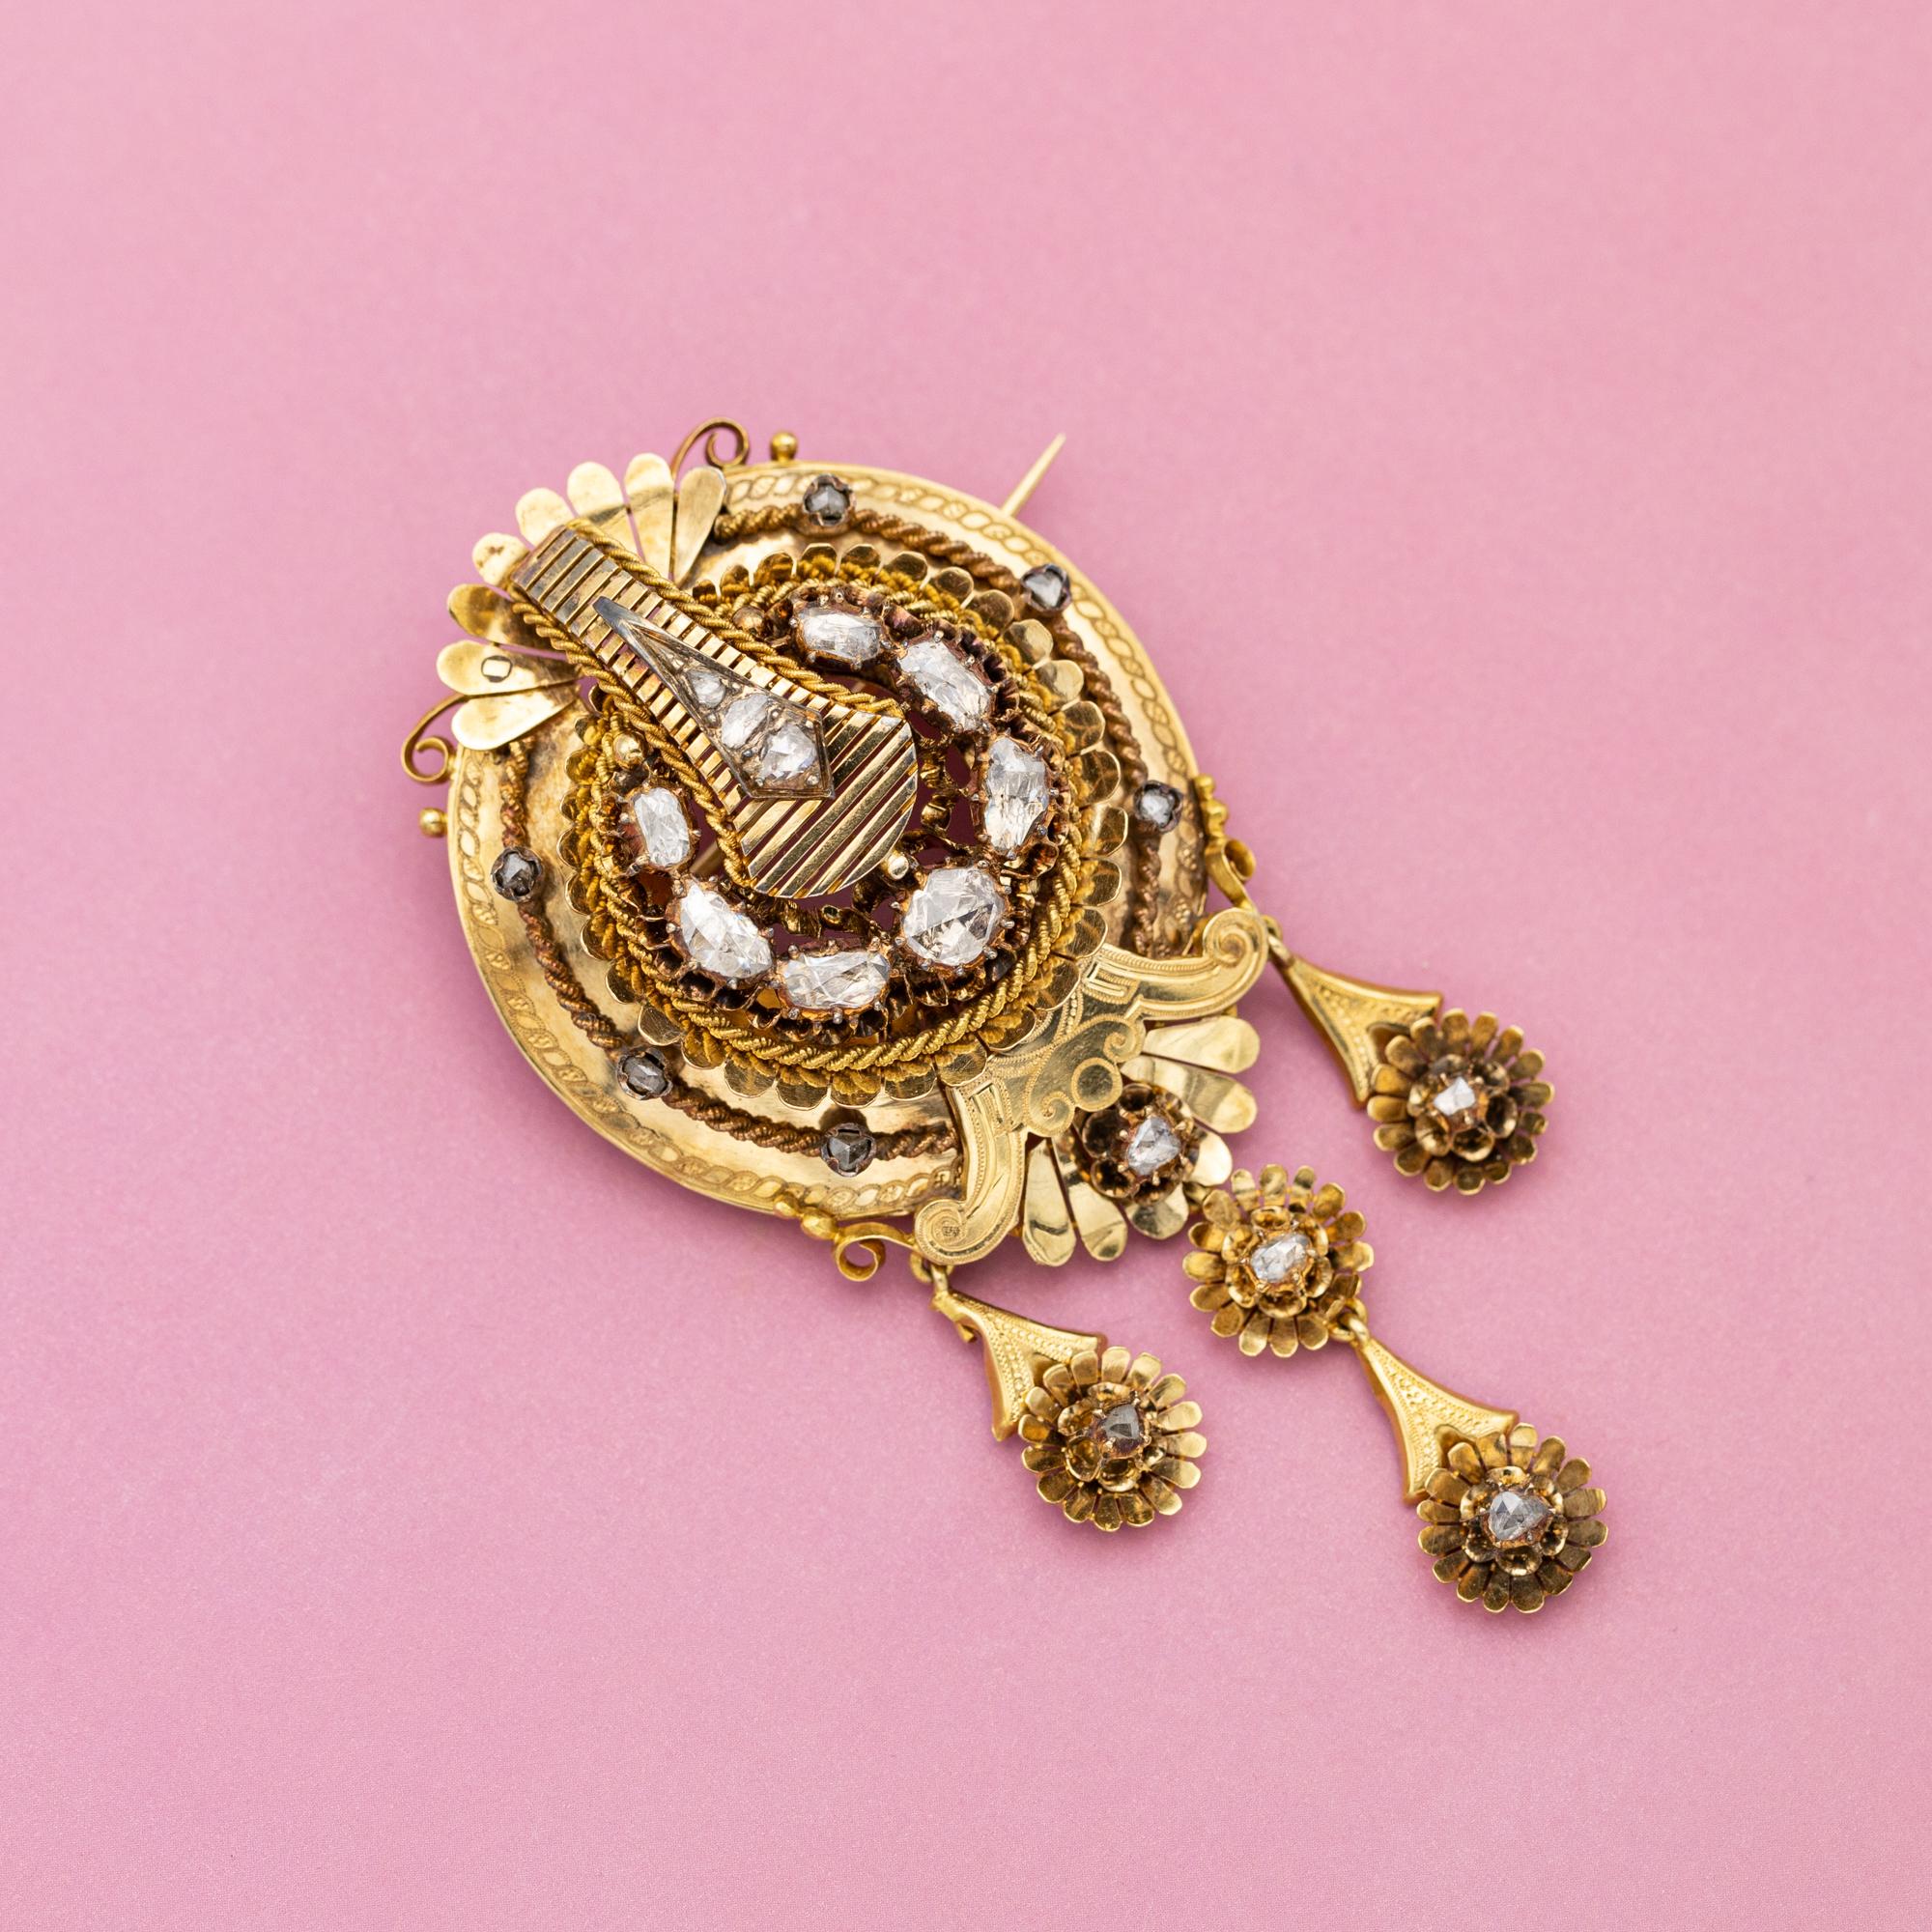 18ct yellow gold Victorian brooch - Large and heavy foiled back diamond heirloom For Sale 6